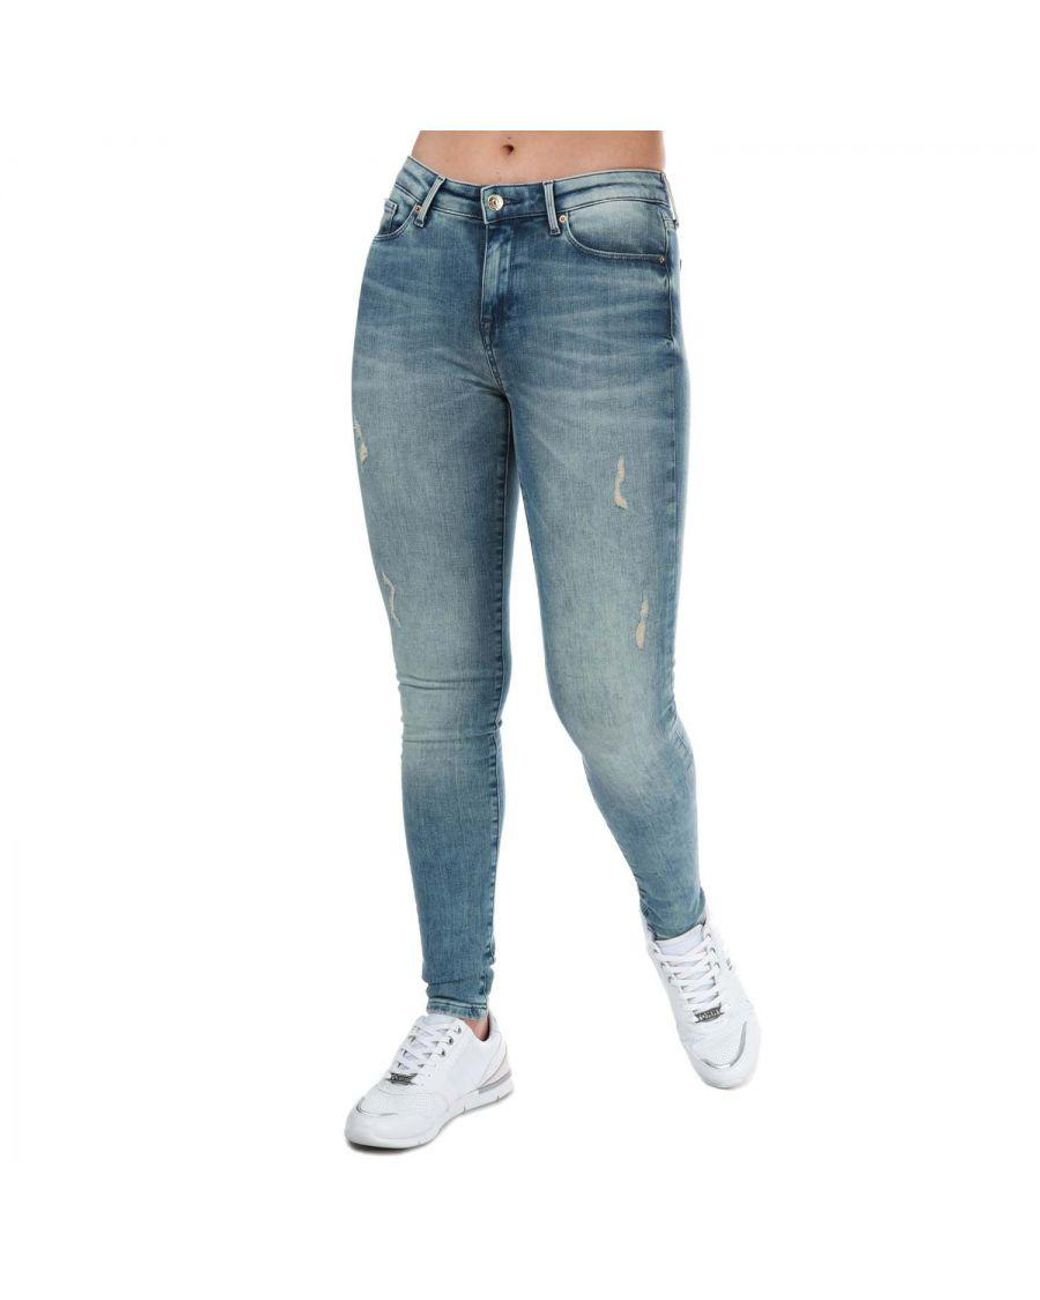 Tommy Hilfiger Como Heritage Faded Skinny Fit Jeans in het Blauw | Lyst NL